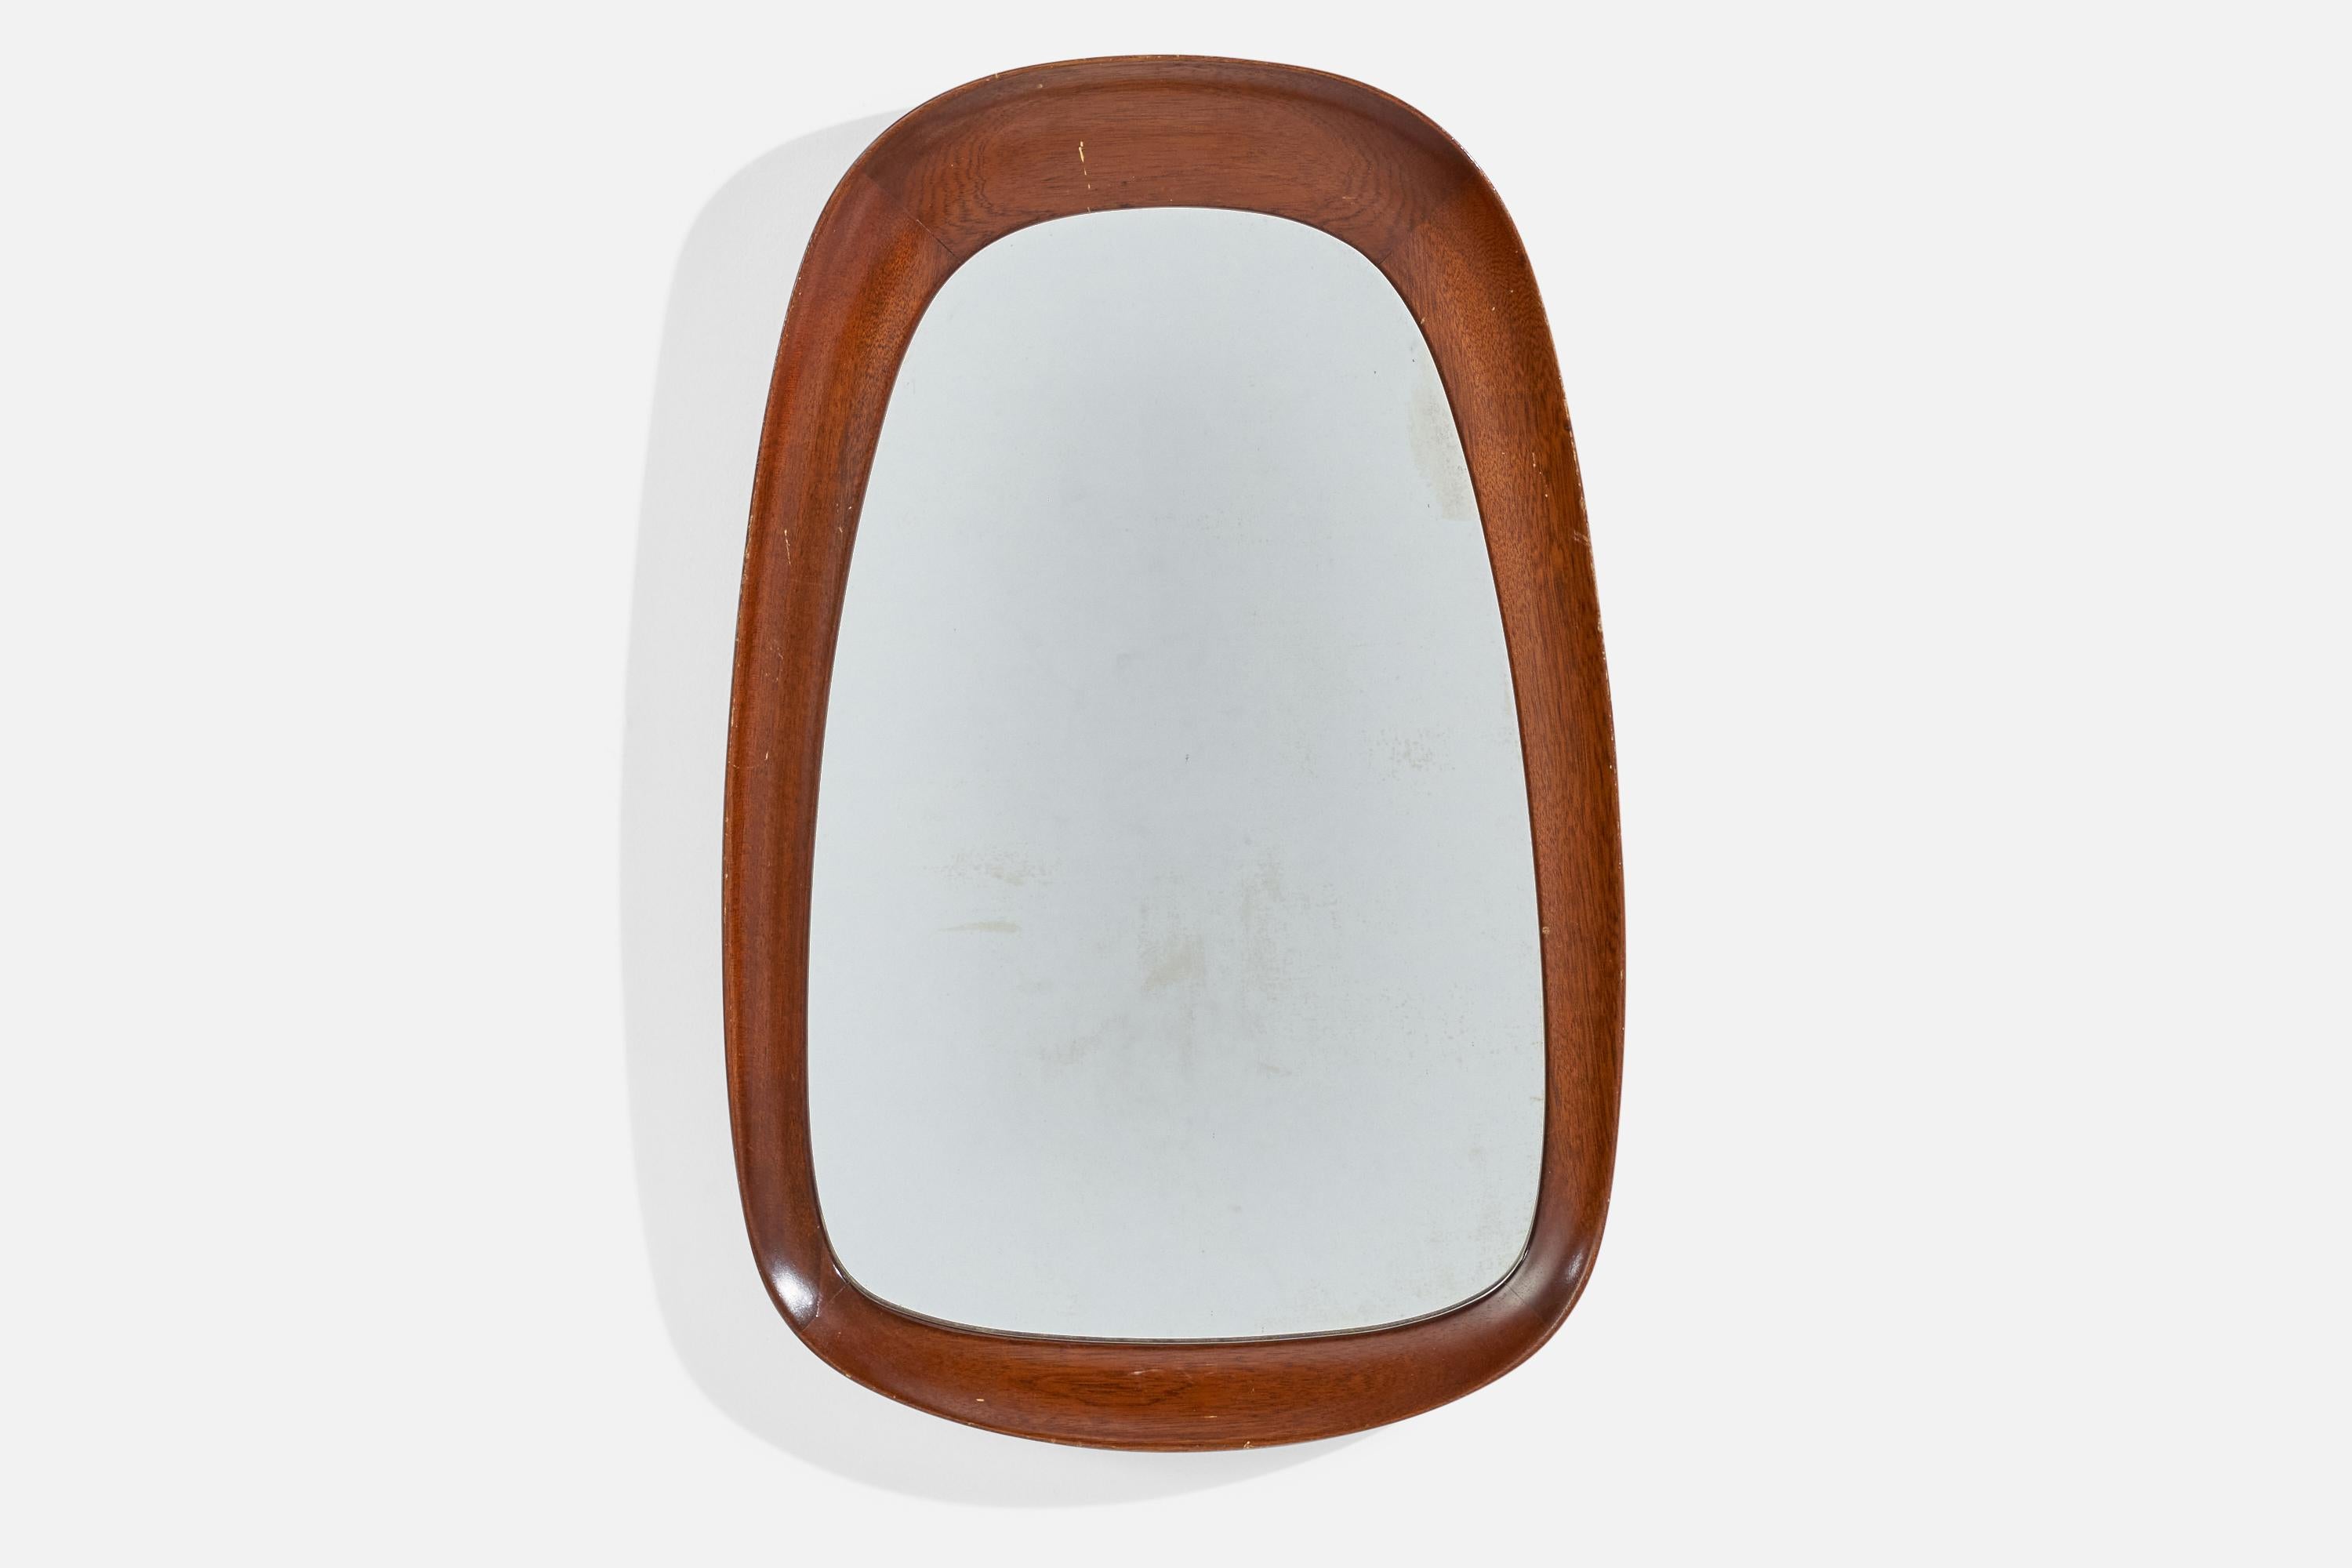 A teak and crystal glass wall mirror designed and produced by Glas & Trä, Hovmantorp, Sweden, 1950s.